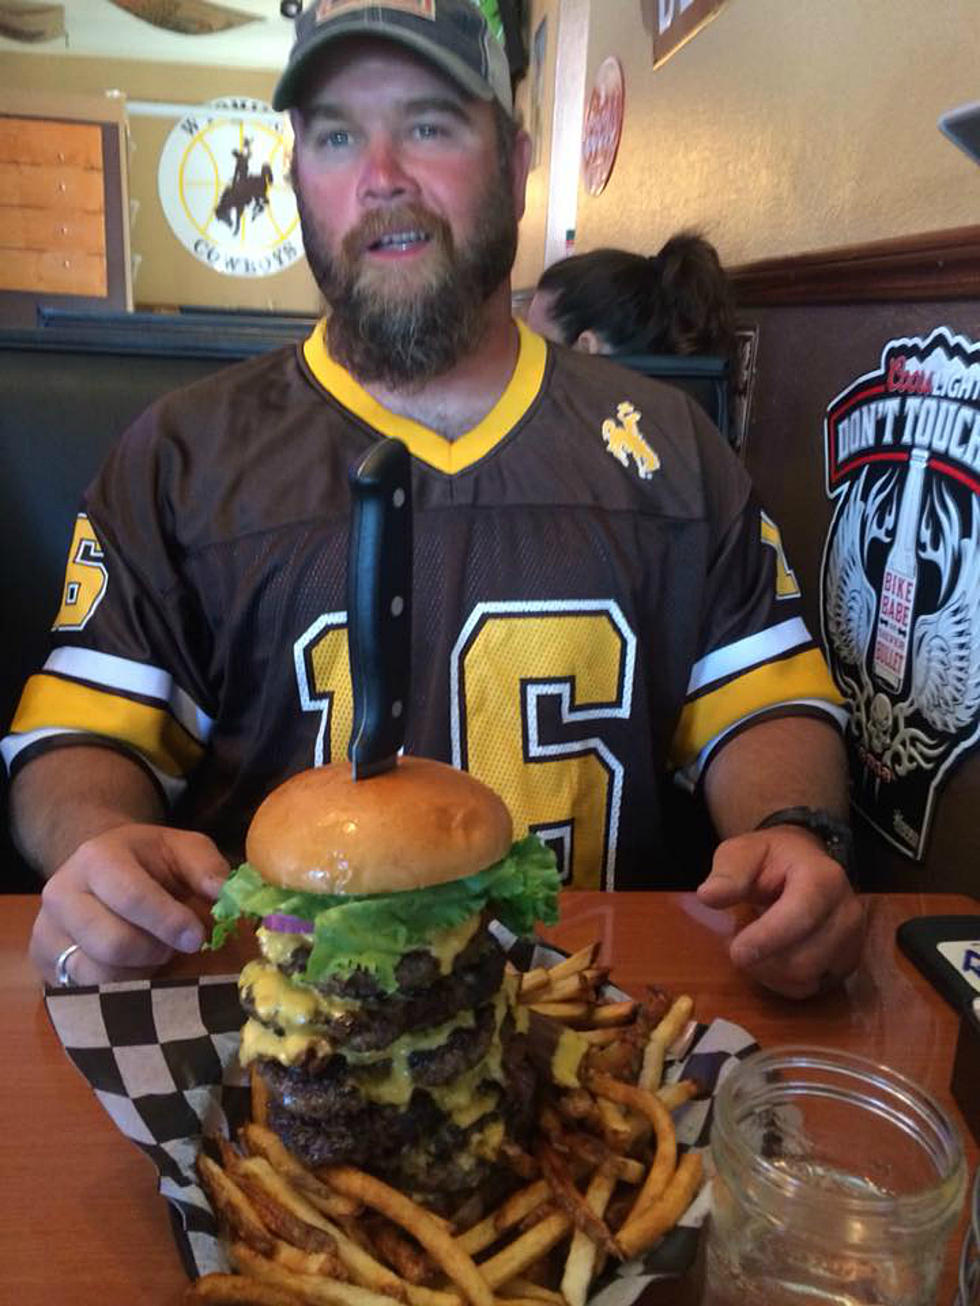 A National Hamburger Day Tribute To Wyoming’s Biggest Burger